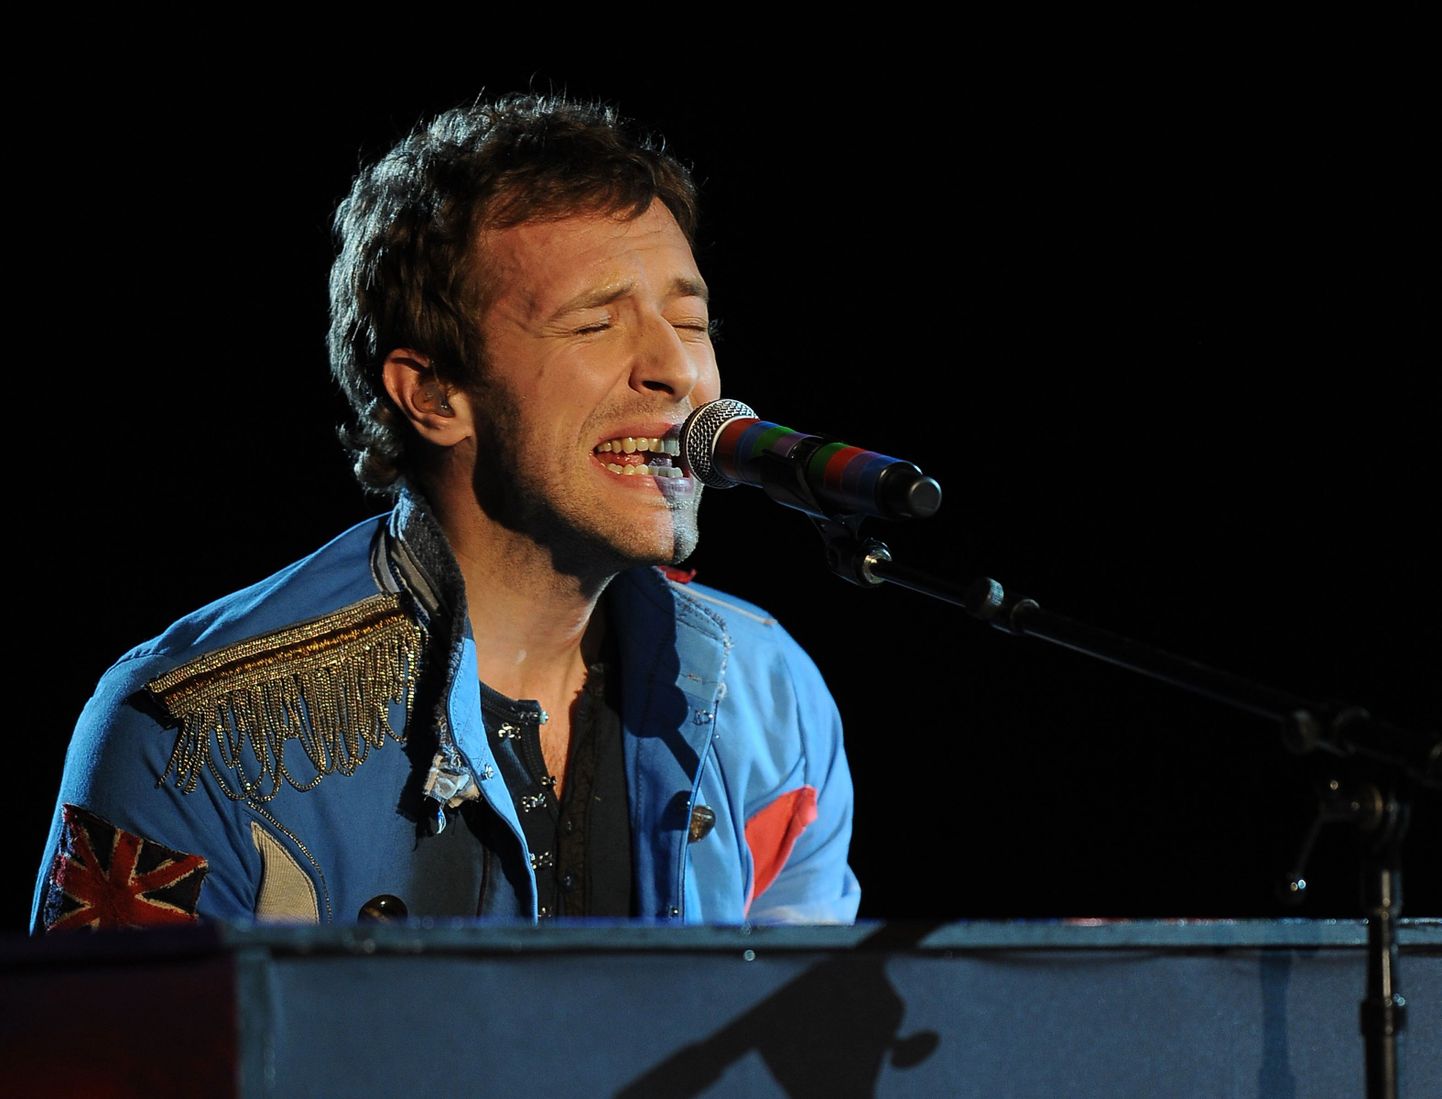 Chris Martin and his band Coldplay perform during the 51st annual Grammy awards held at the Staples Center in Los Angeles on February 8, 2009.       AFP PHOTO/Robyn BECK